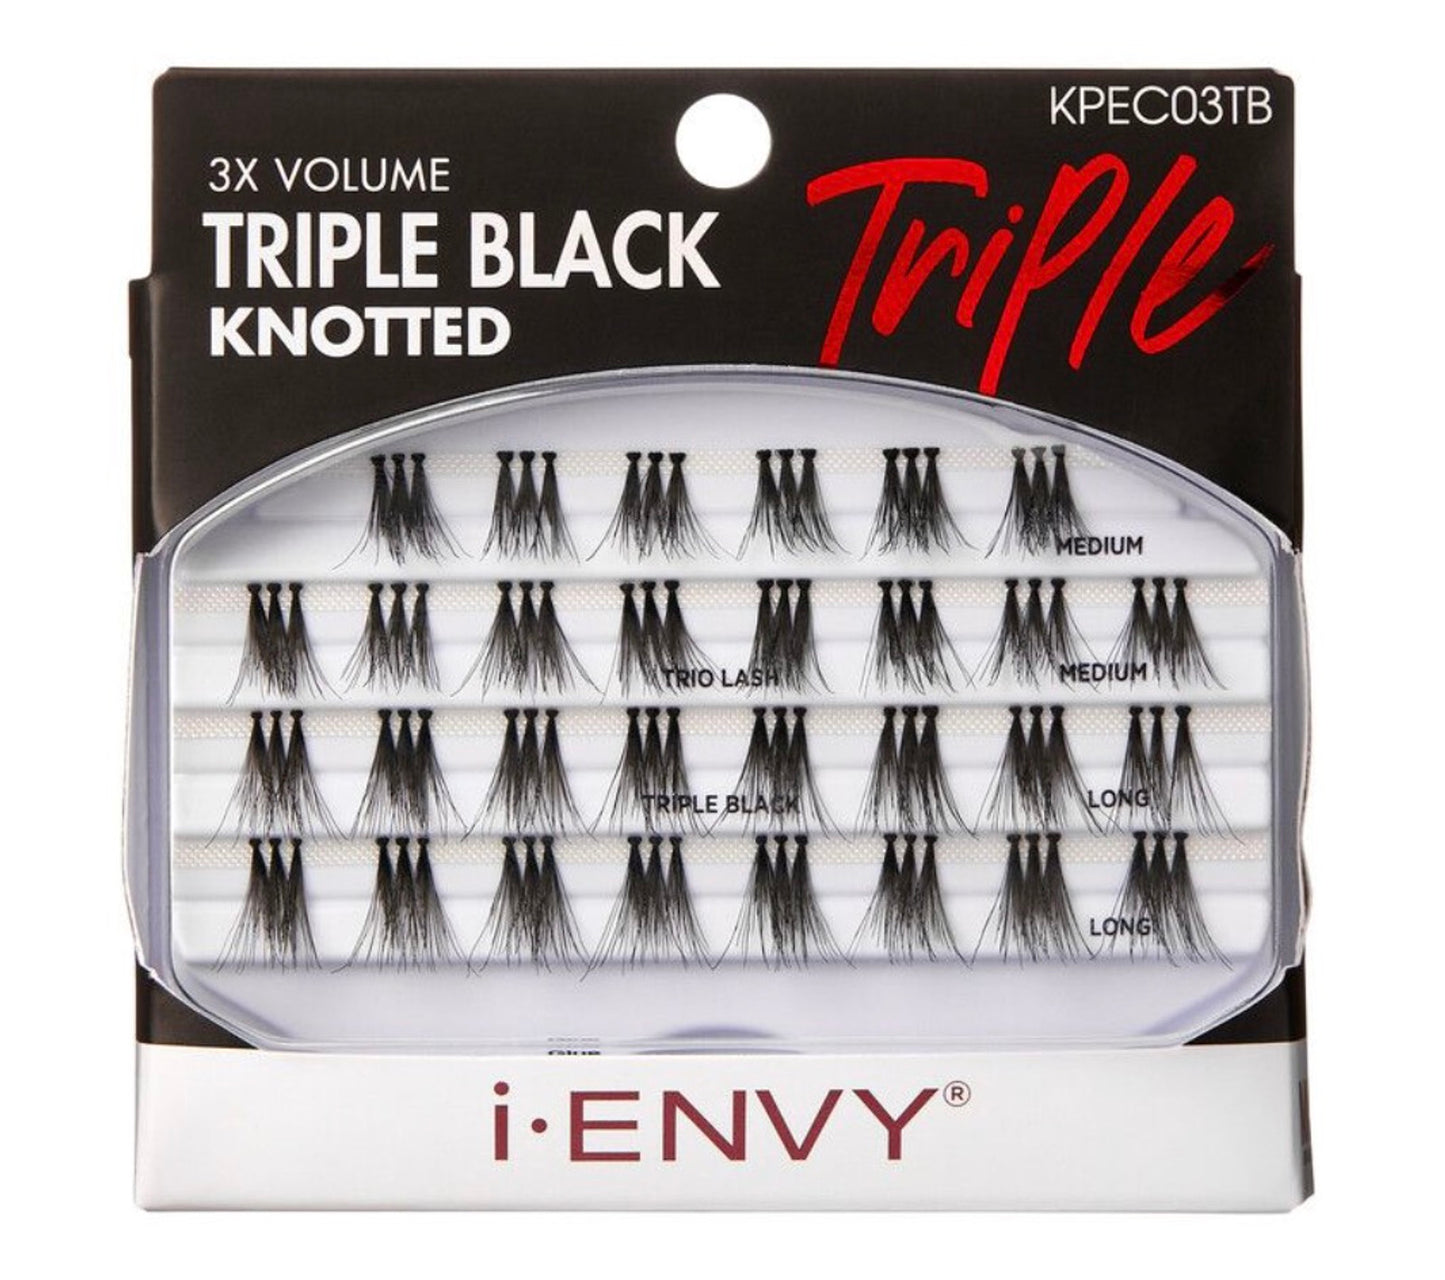 iENVY 3x Volume Triple Black Knotted - Individual Lashes